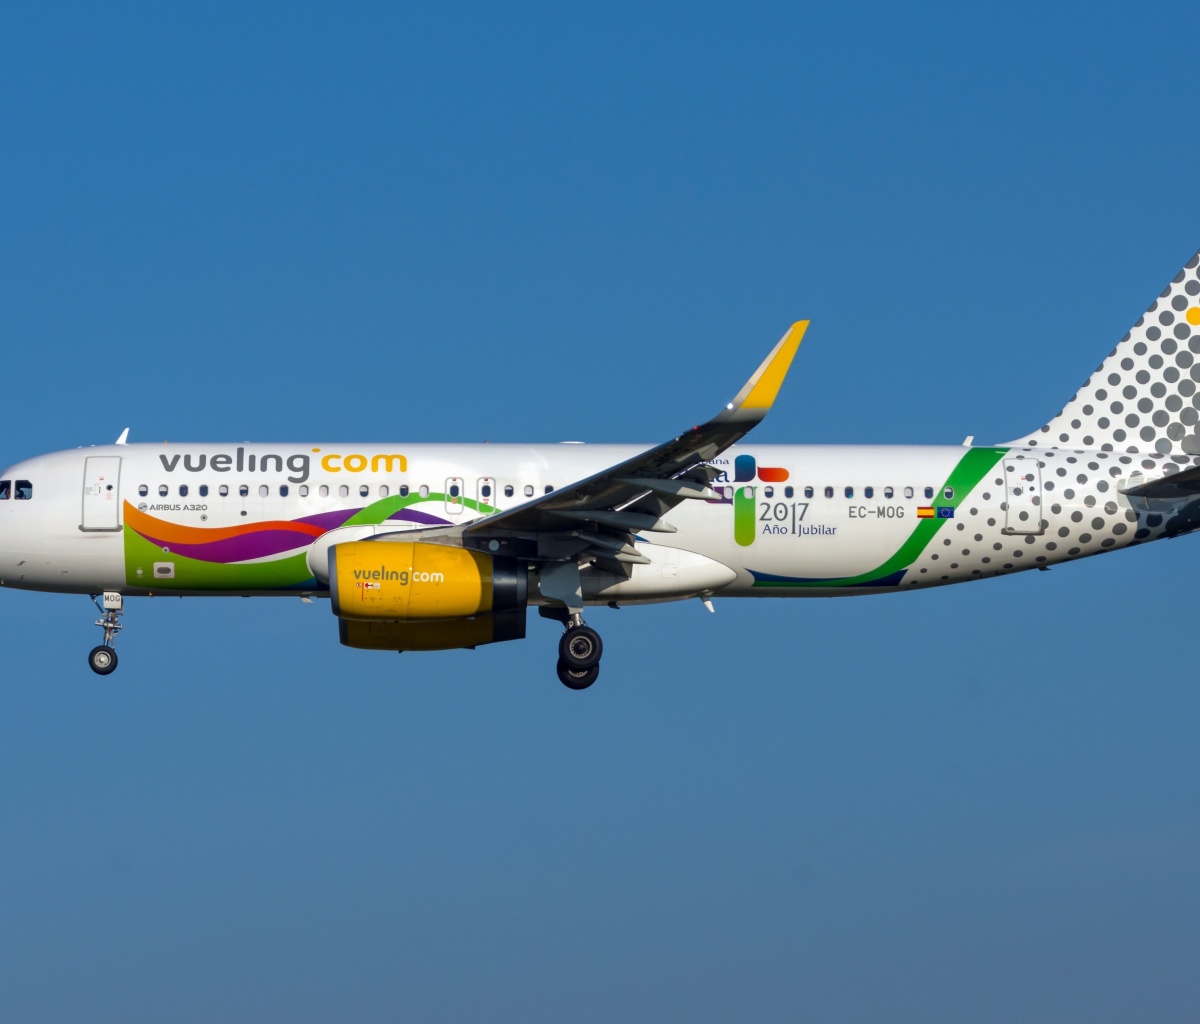 Airbus A320 Vueling Airlines wallpaper 1200x1024